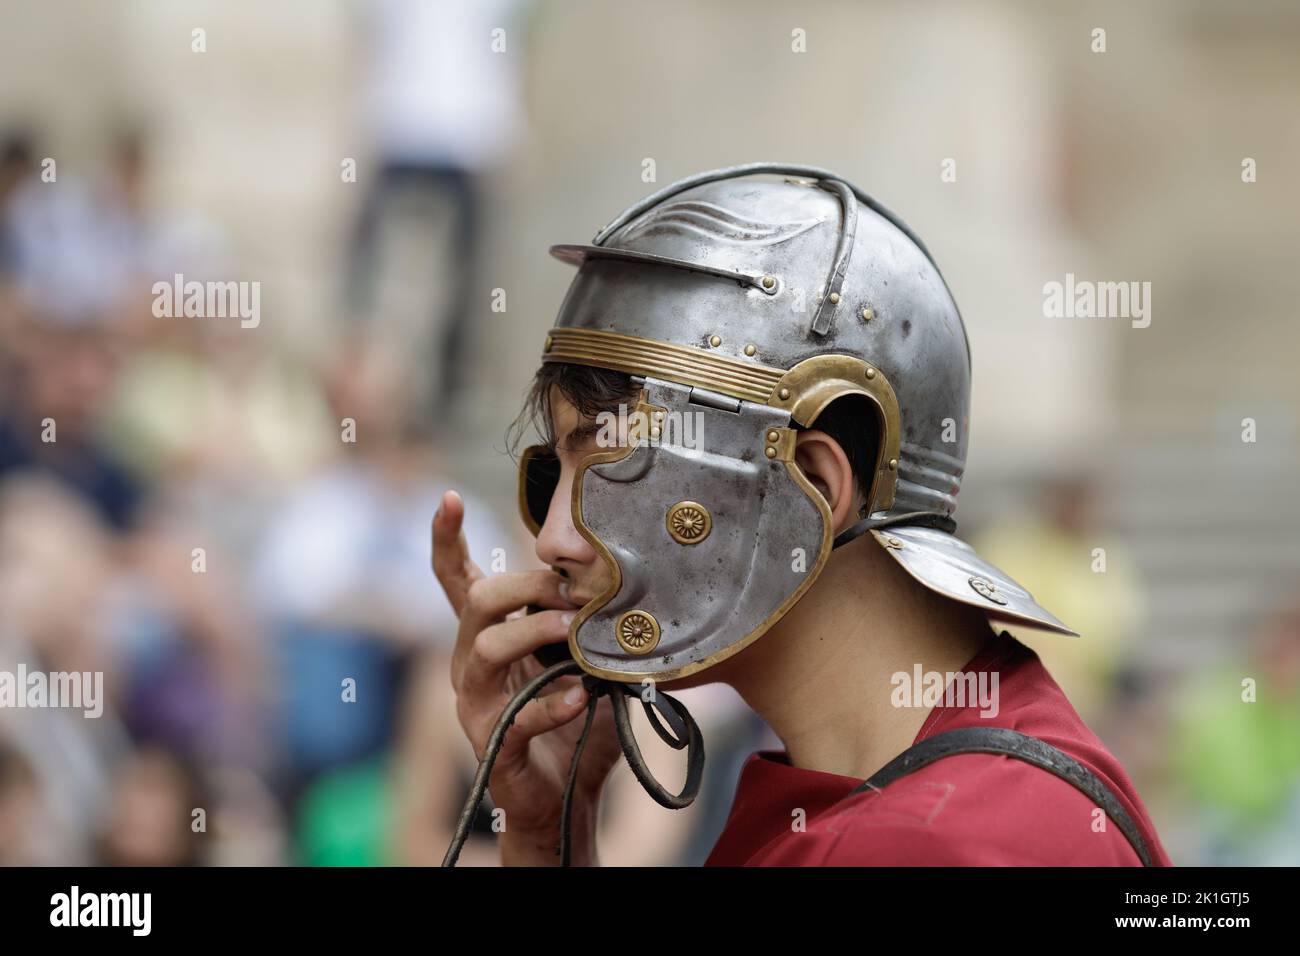 Bucharest, Romania - September 17, 2022: Details with an ancient Roman soldier's helmet during a historic reenactment event. Stock Photo